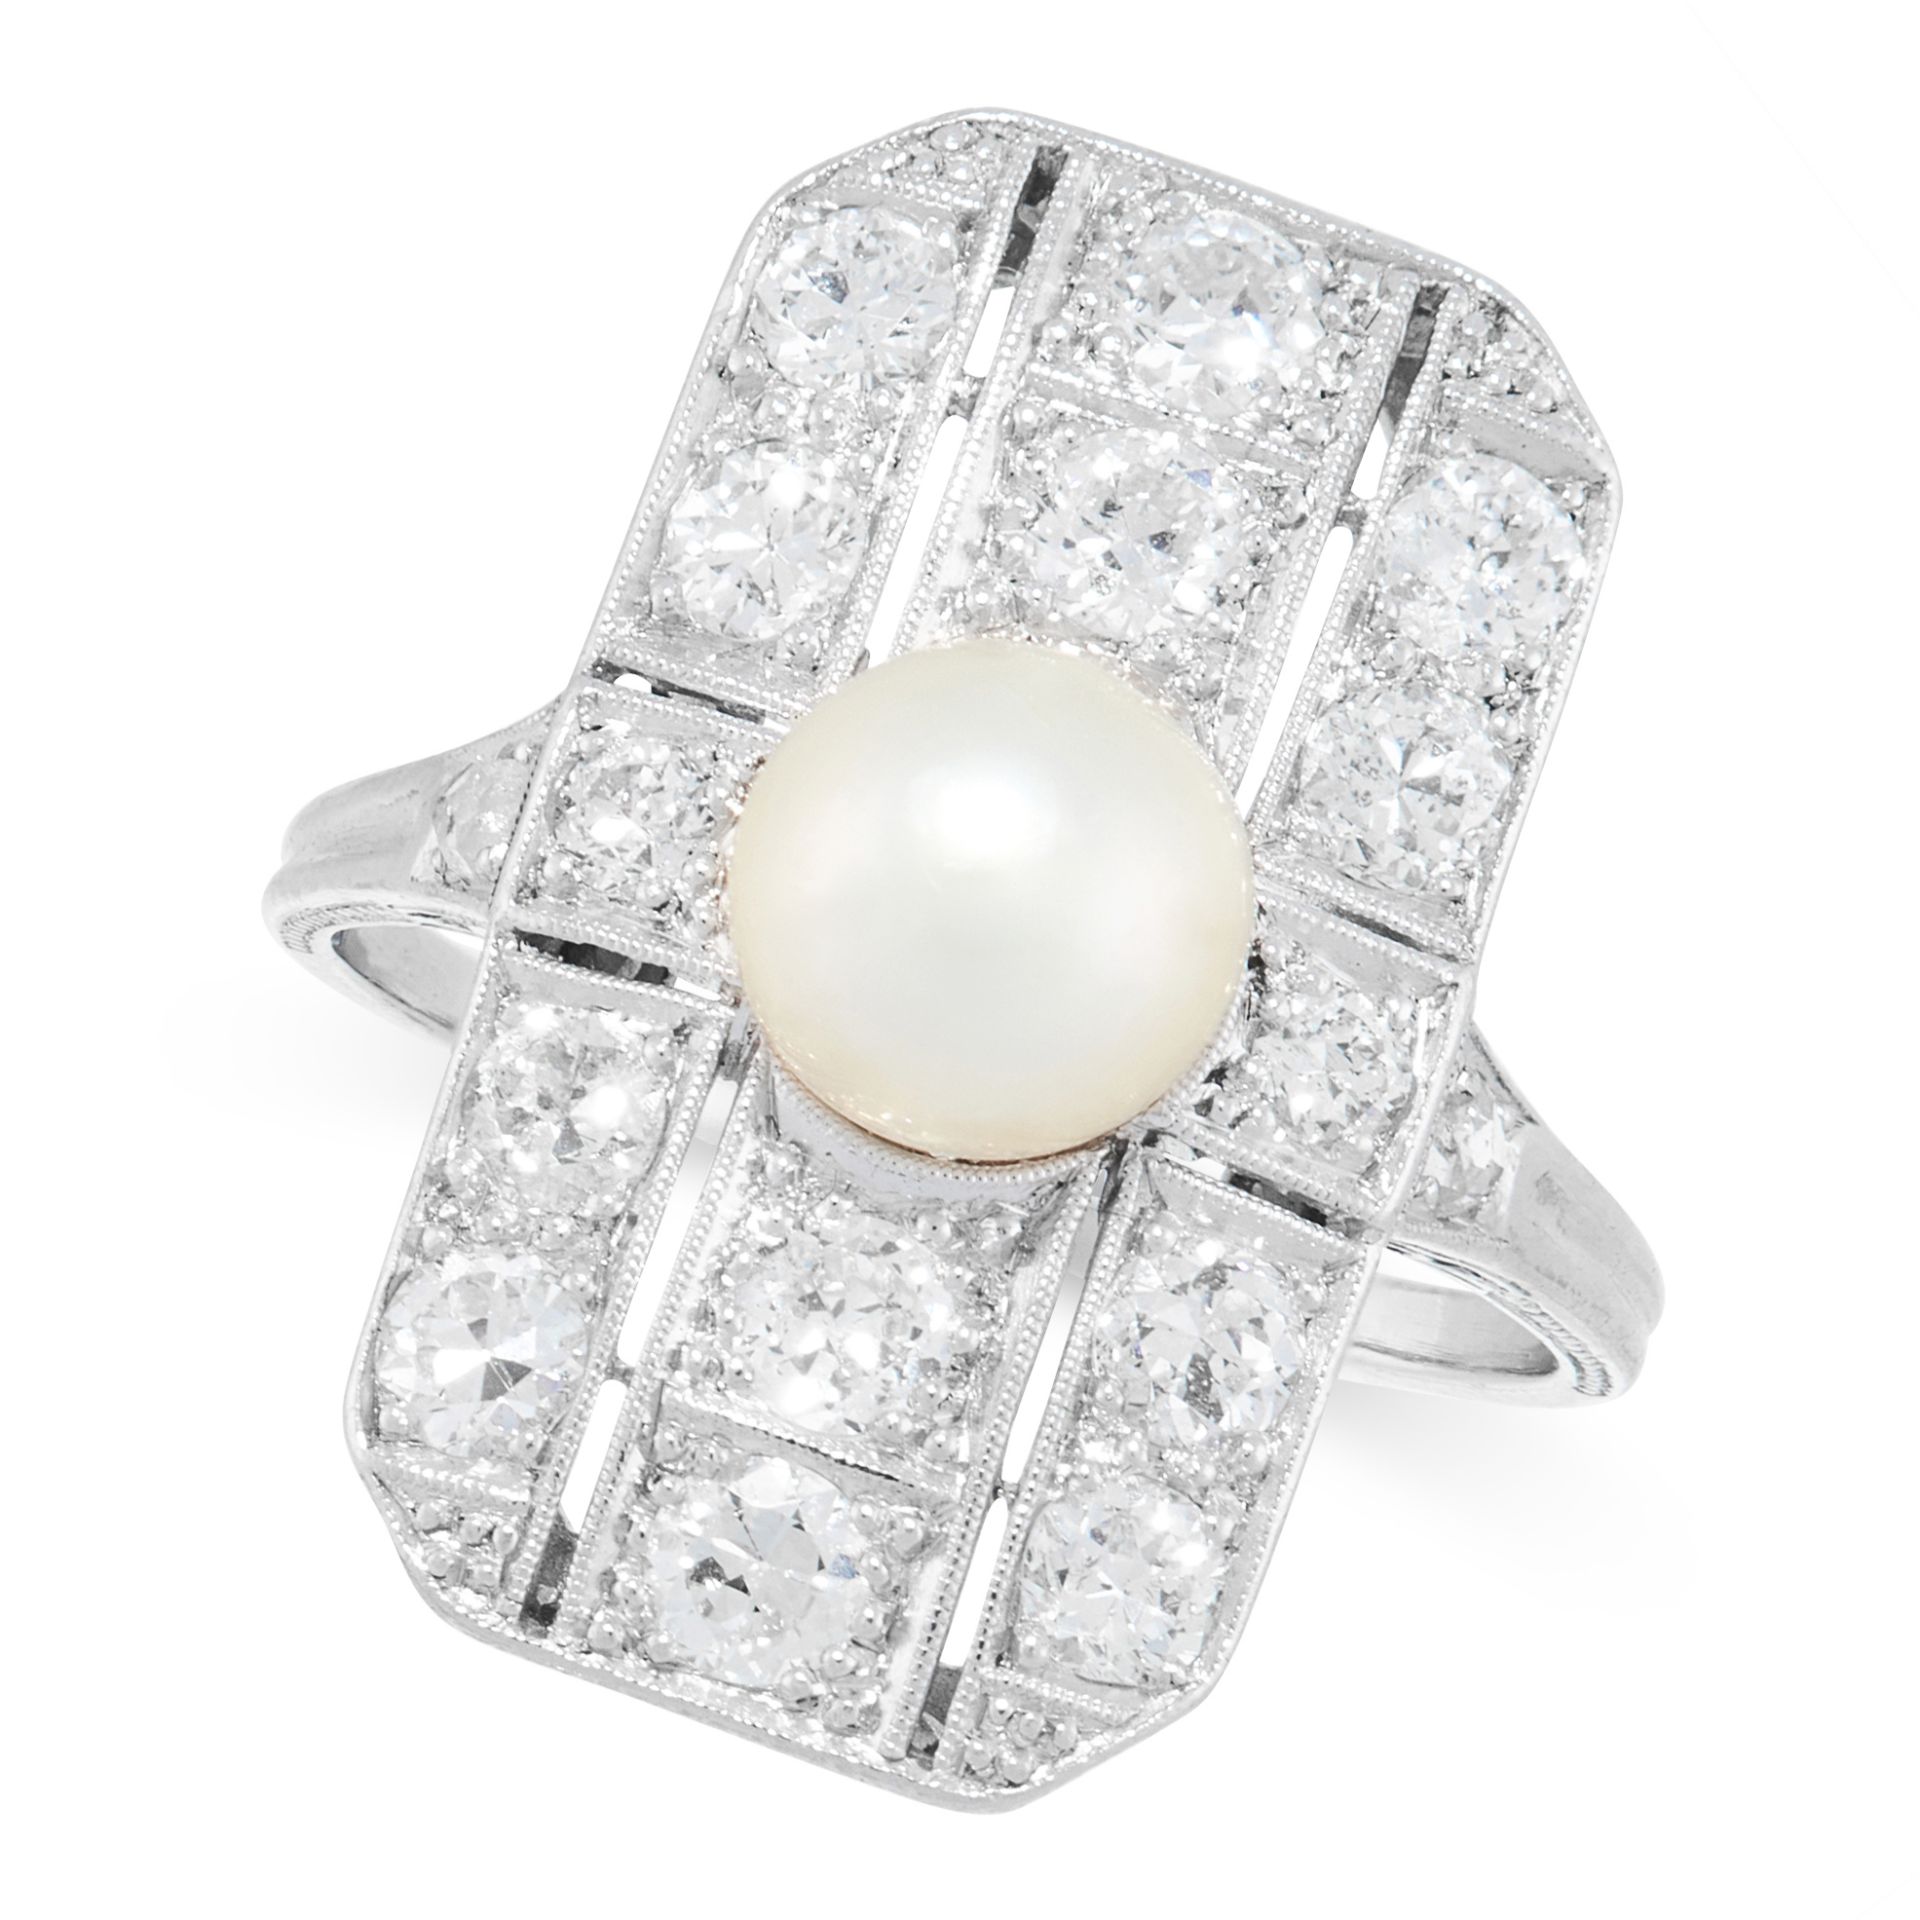 NATURAL PEARL AND DIAMOND RING designed as an open work plaque millegrain-set with circular-cut